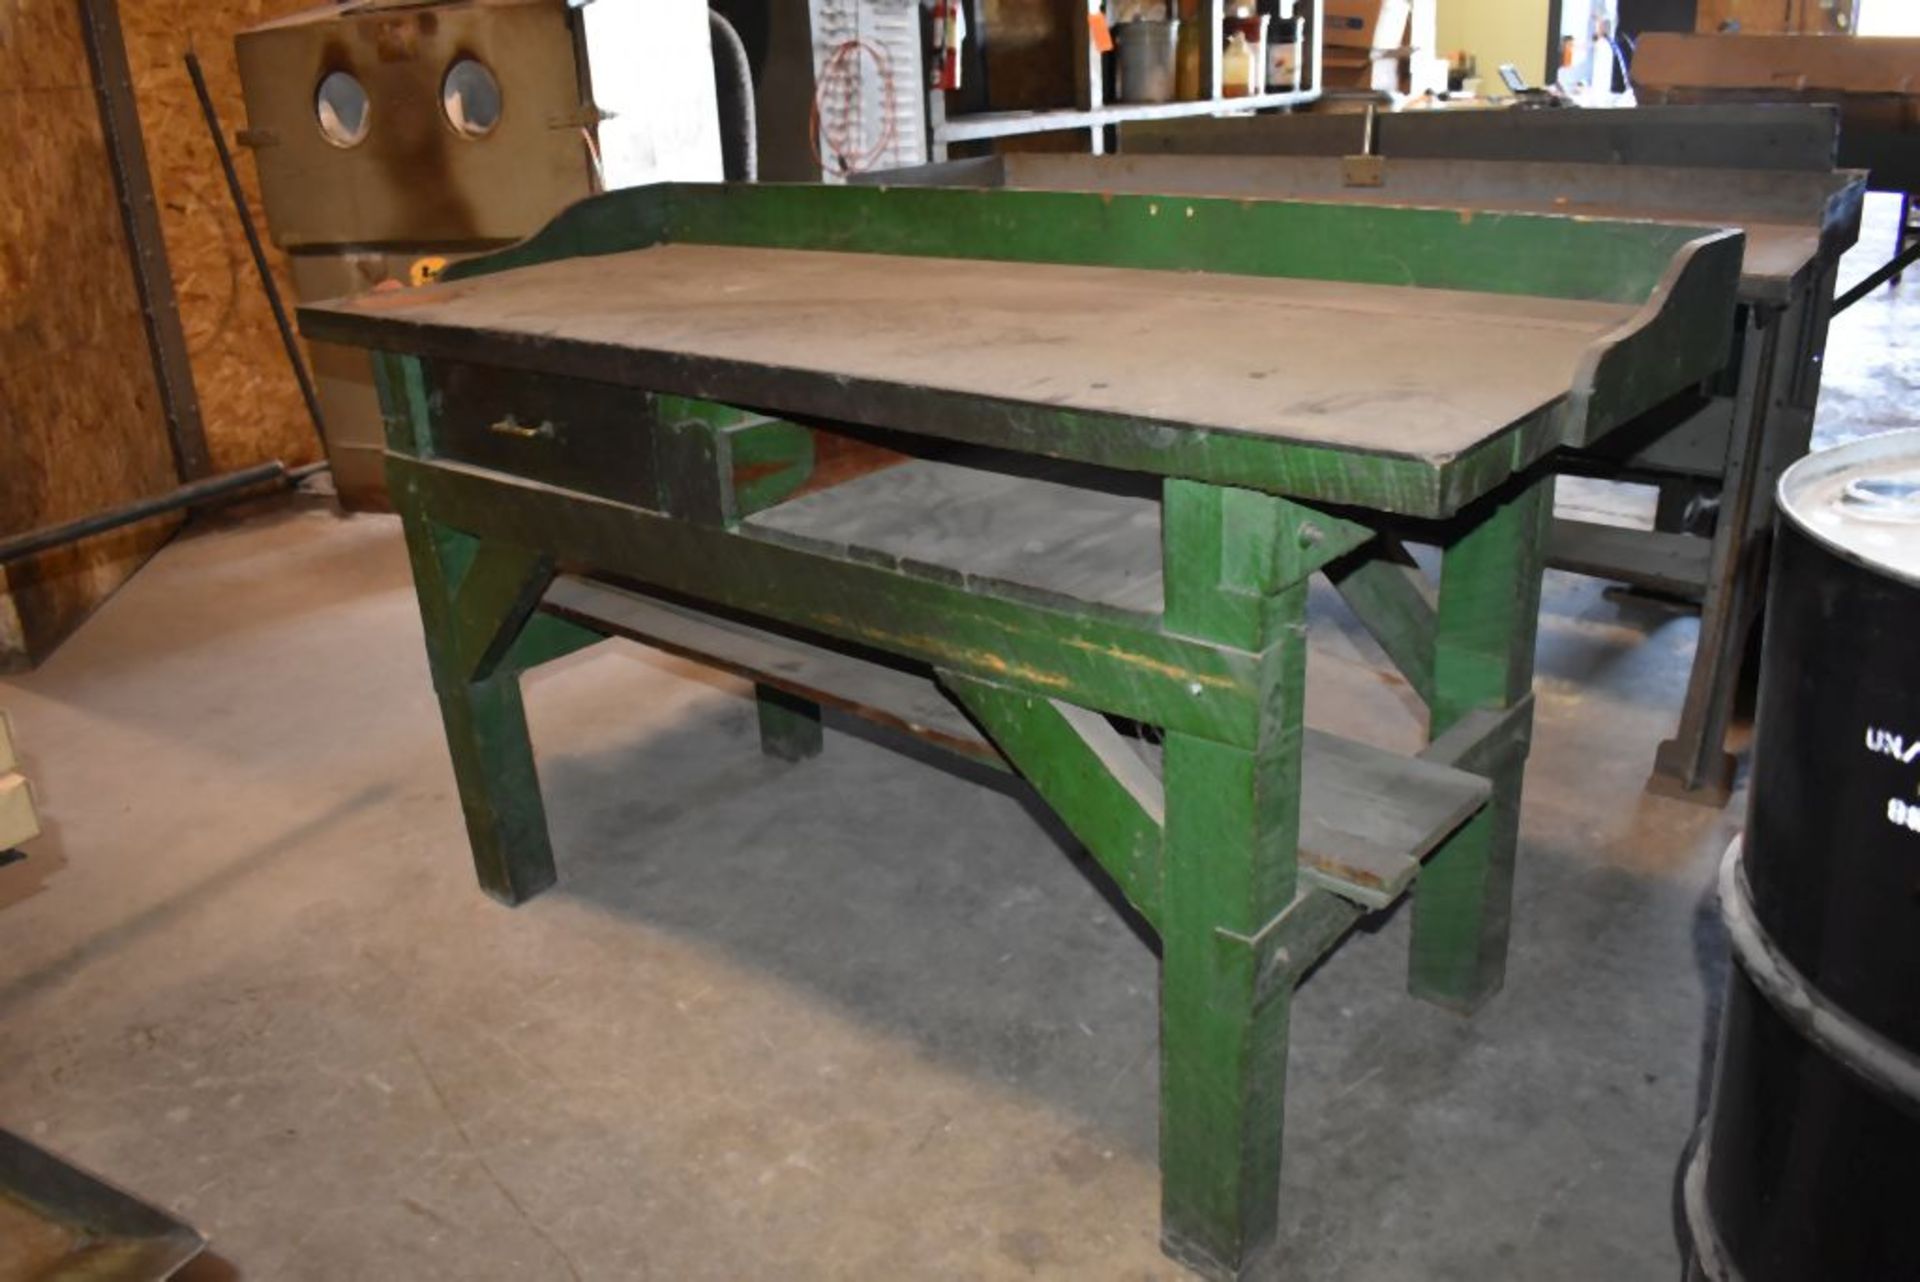 WOOD WORKBENCH, NO CONTENTS, 64"L x 28"D x 34"H - Image 2 of 2